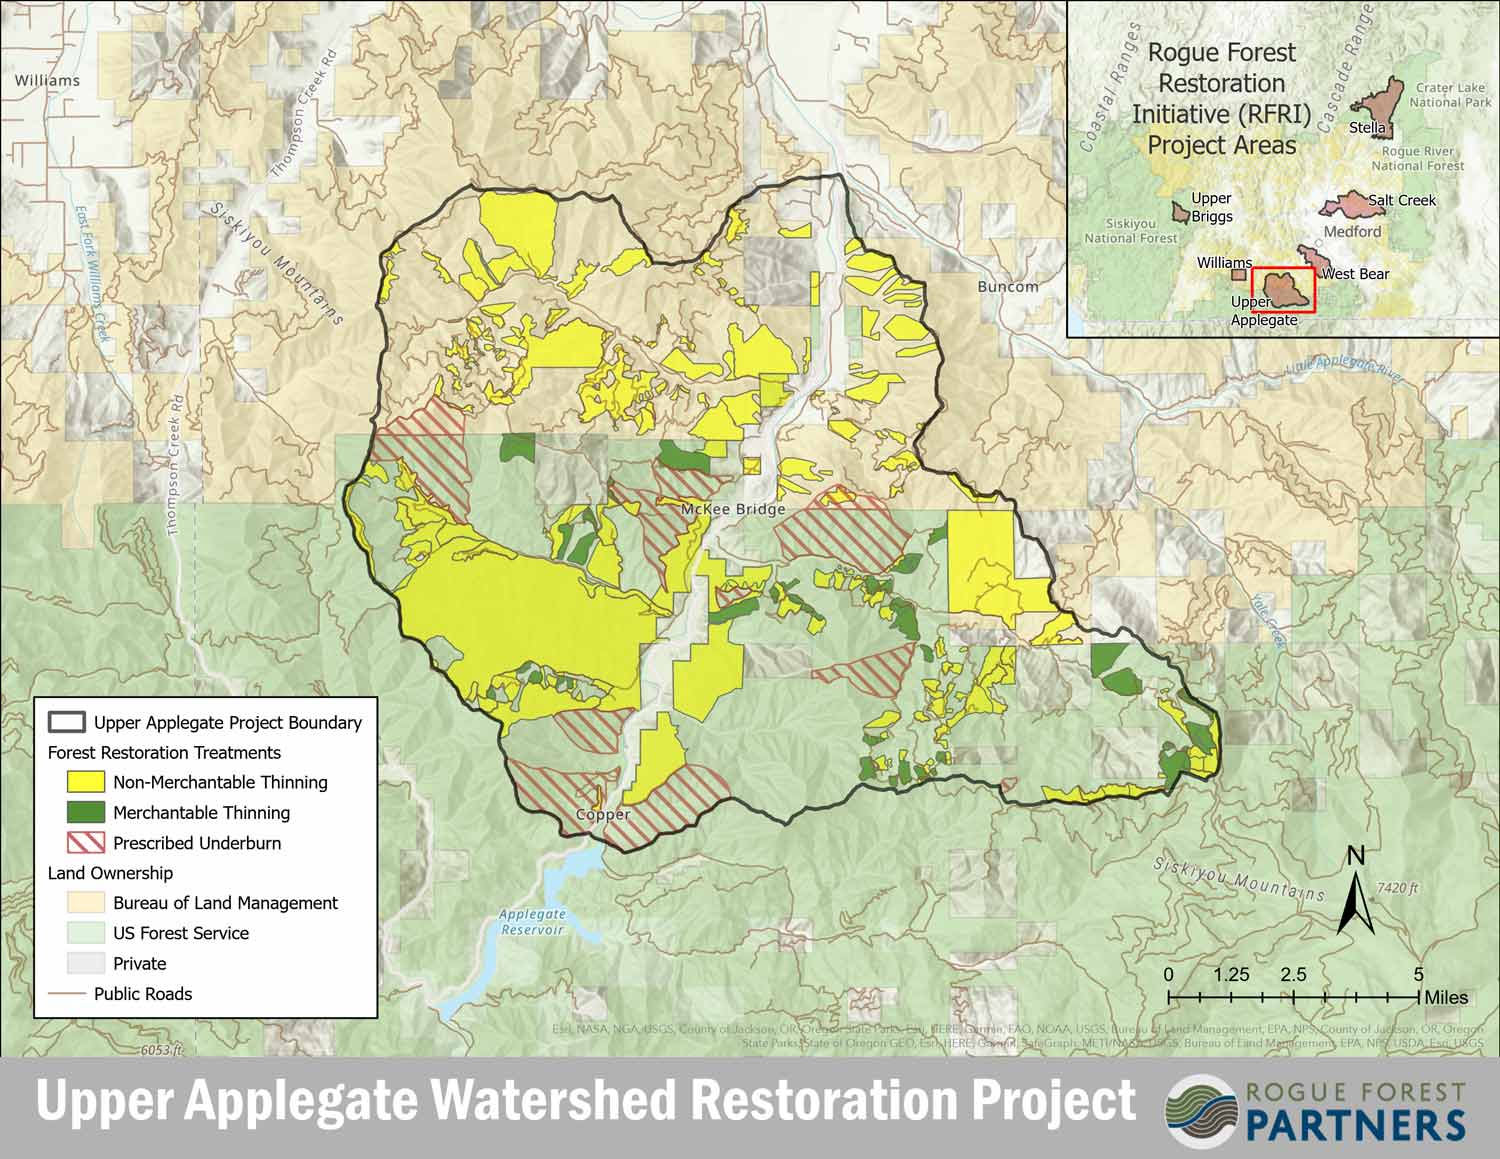 The Upper Applegate Watershed Restoration Project lies south of the communities of Ruch and Williams and north of Applegate Lake.